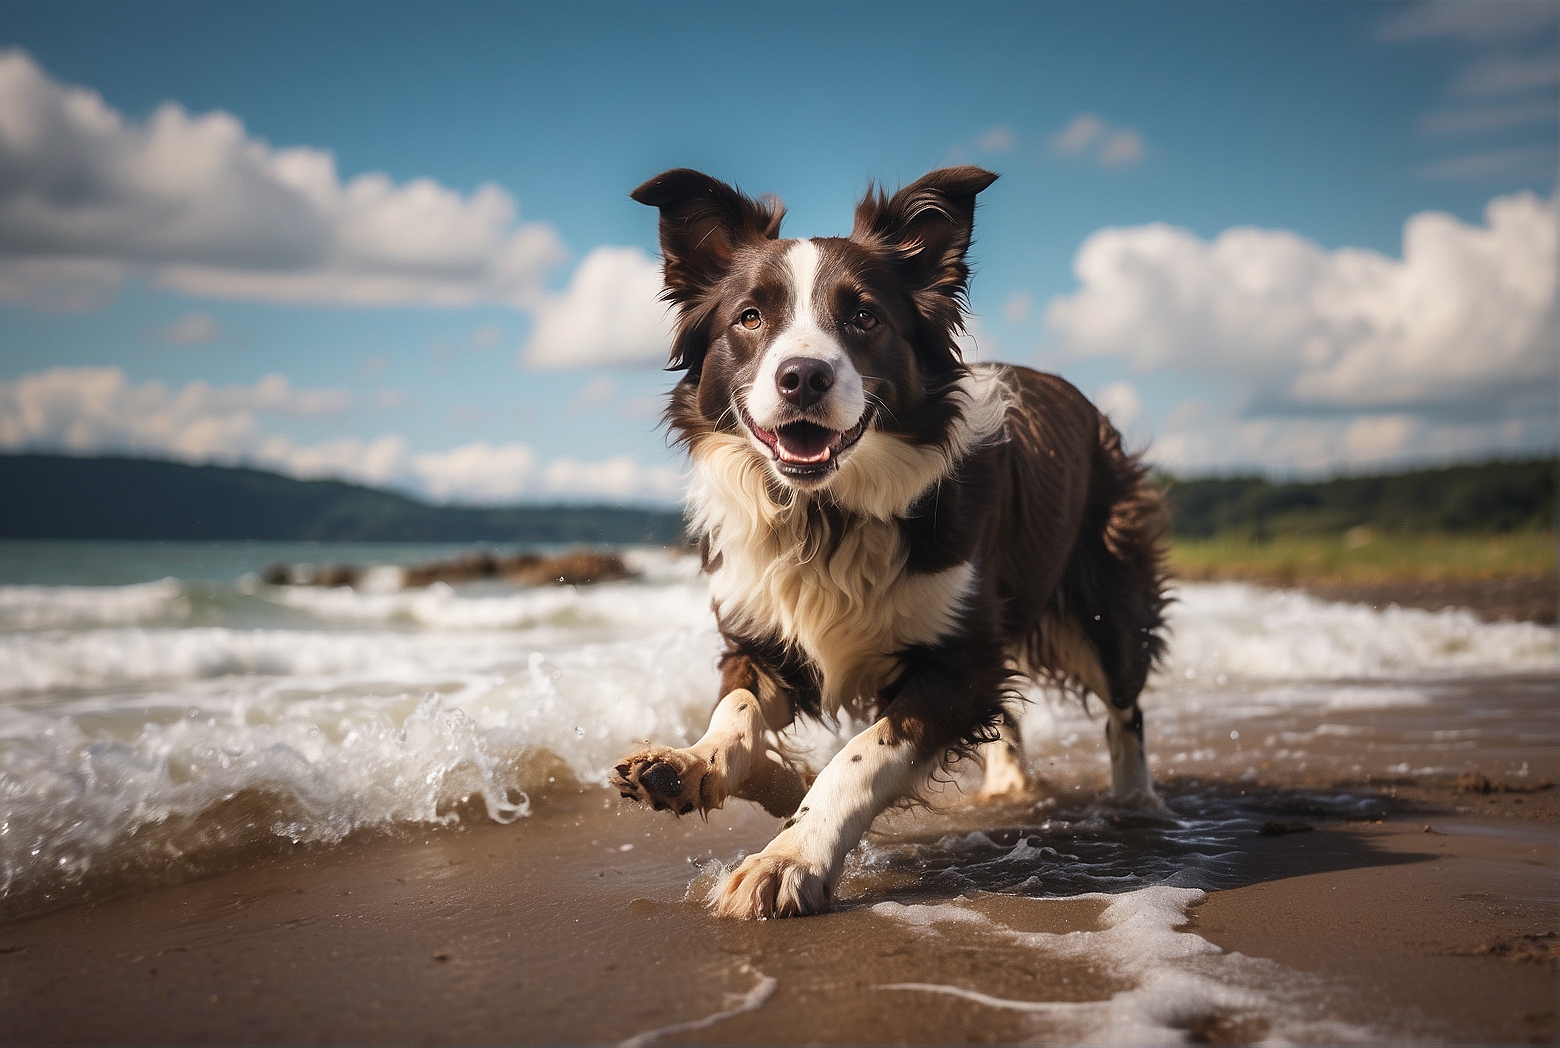 How To Make A Border Collie Not Aggressive